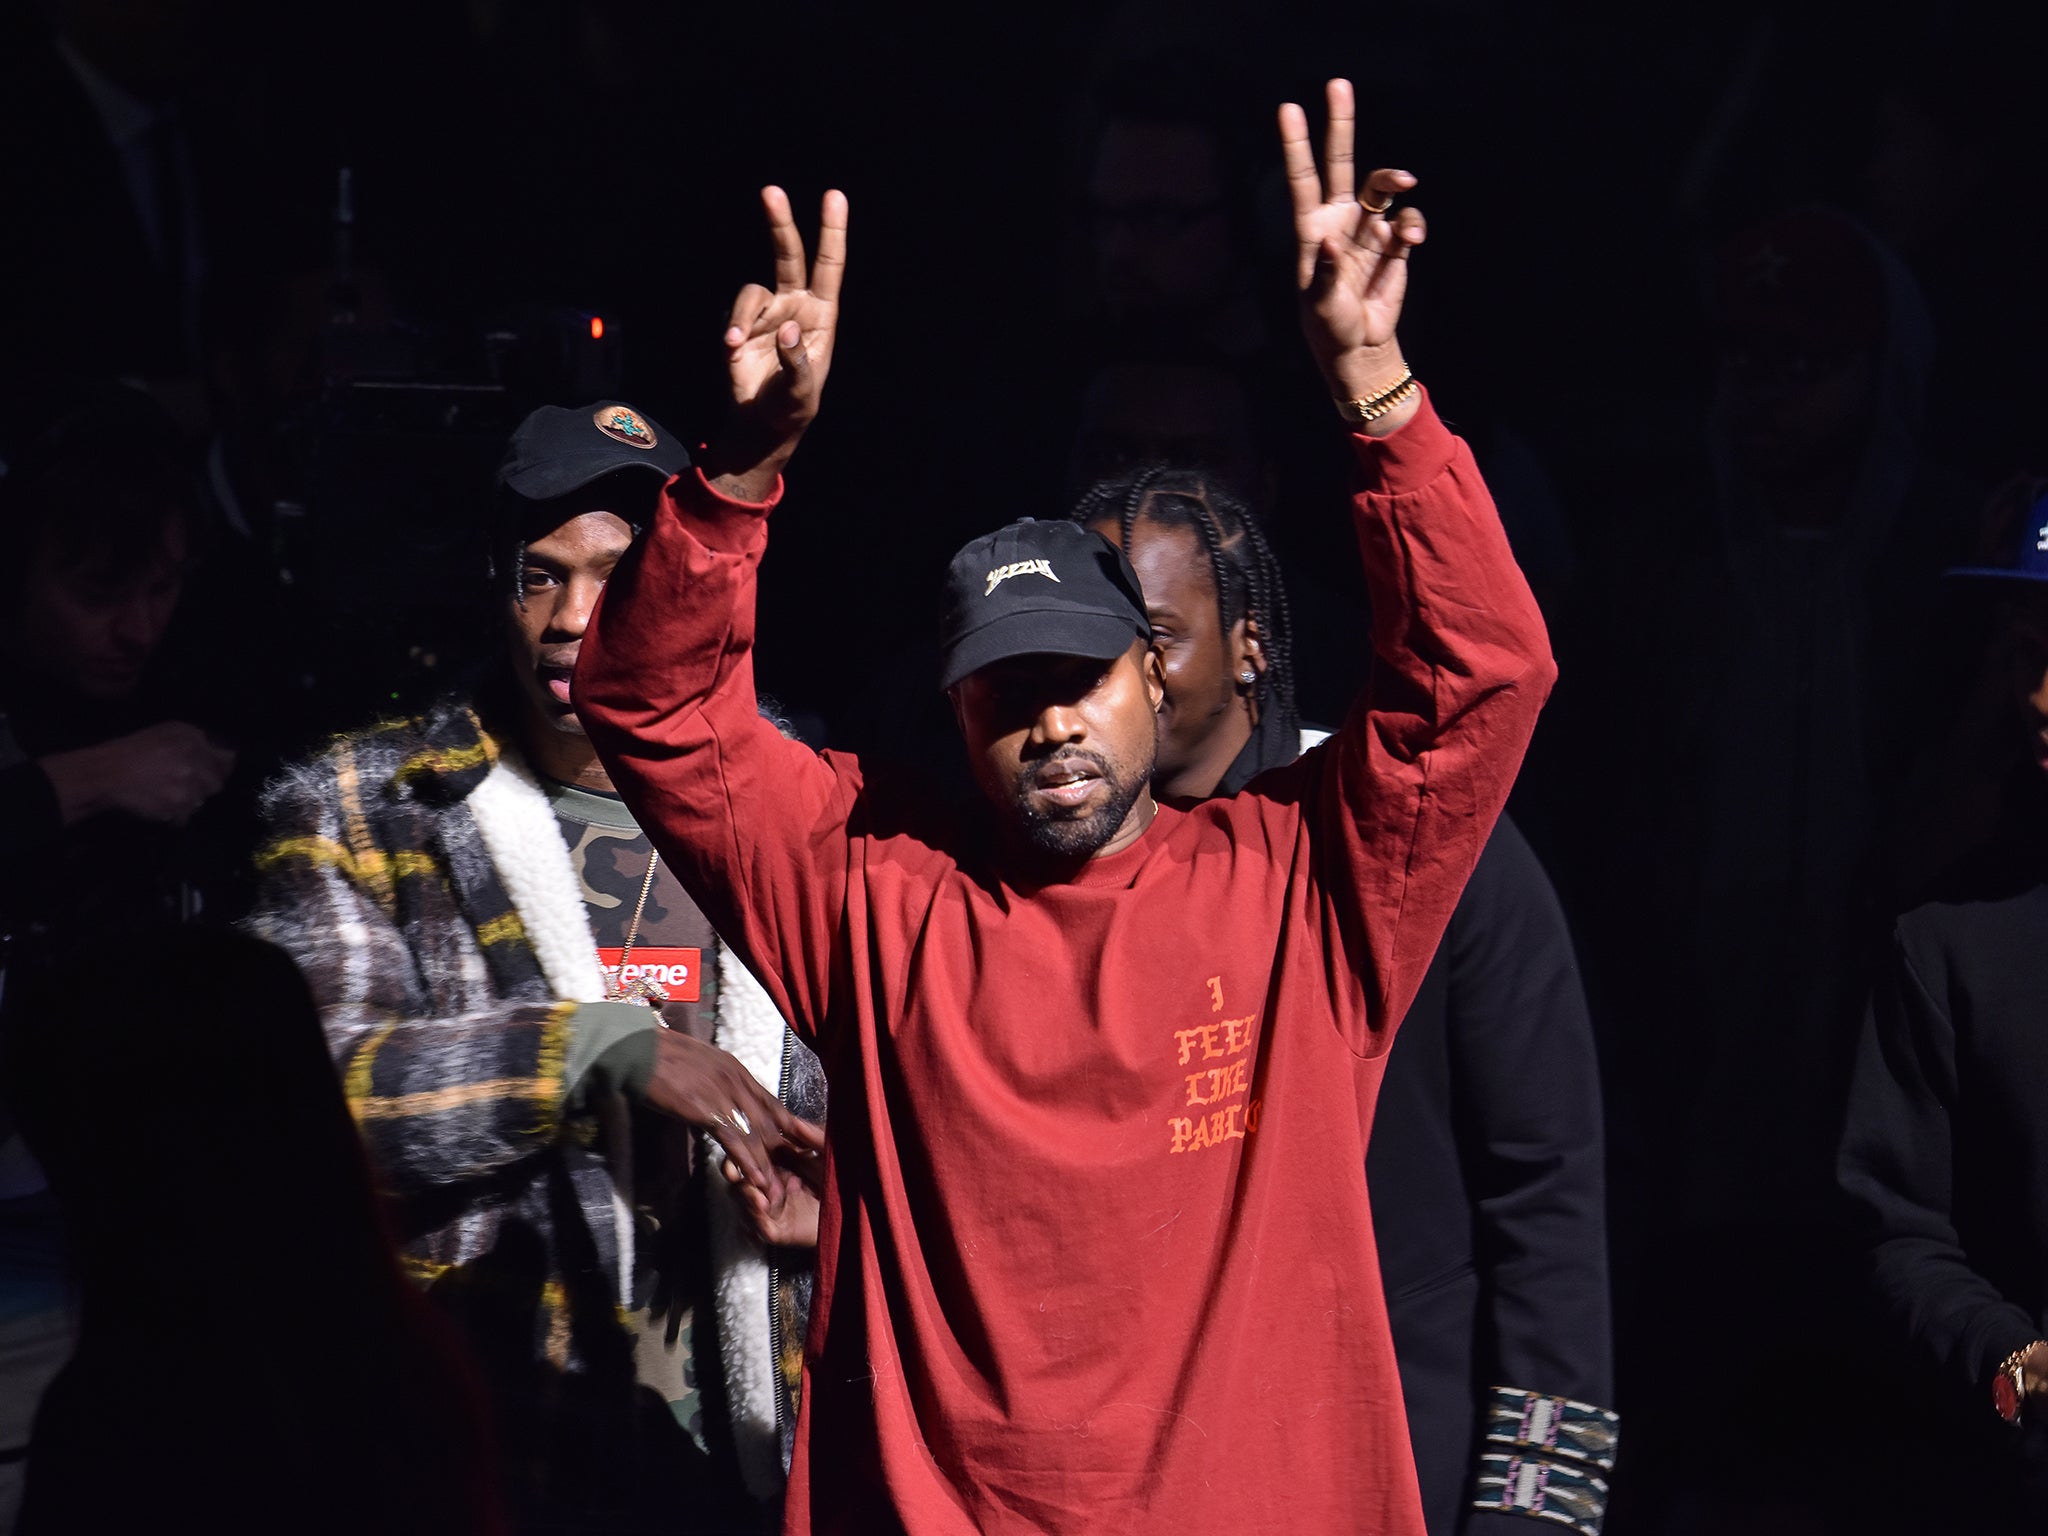 Kanye didn’t perform, instead choosing to stream his record through the loudspeakers